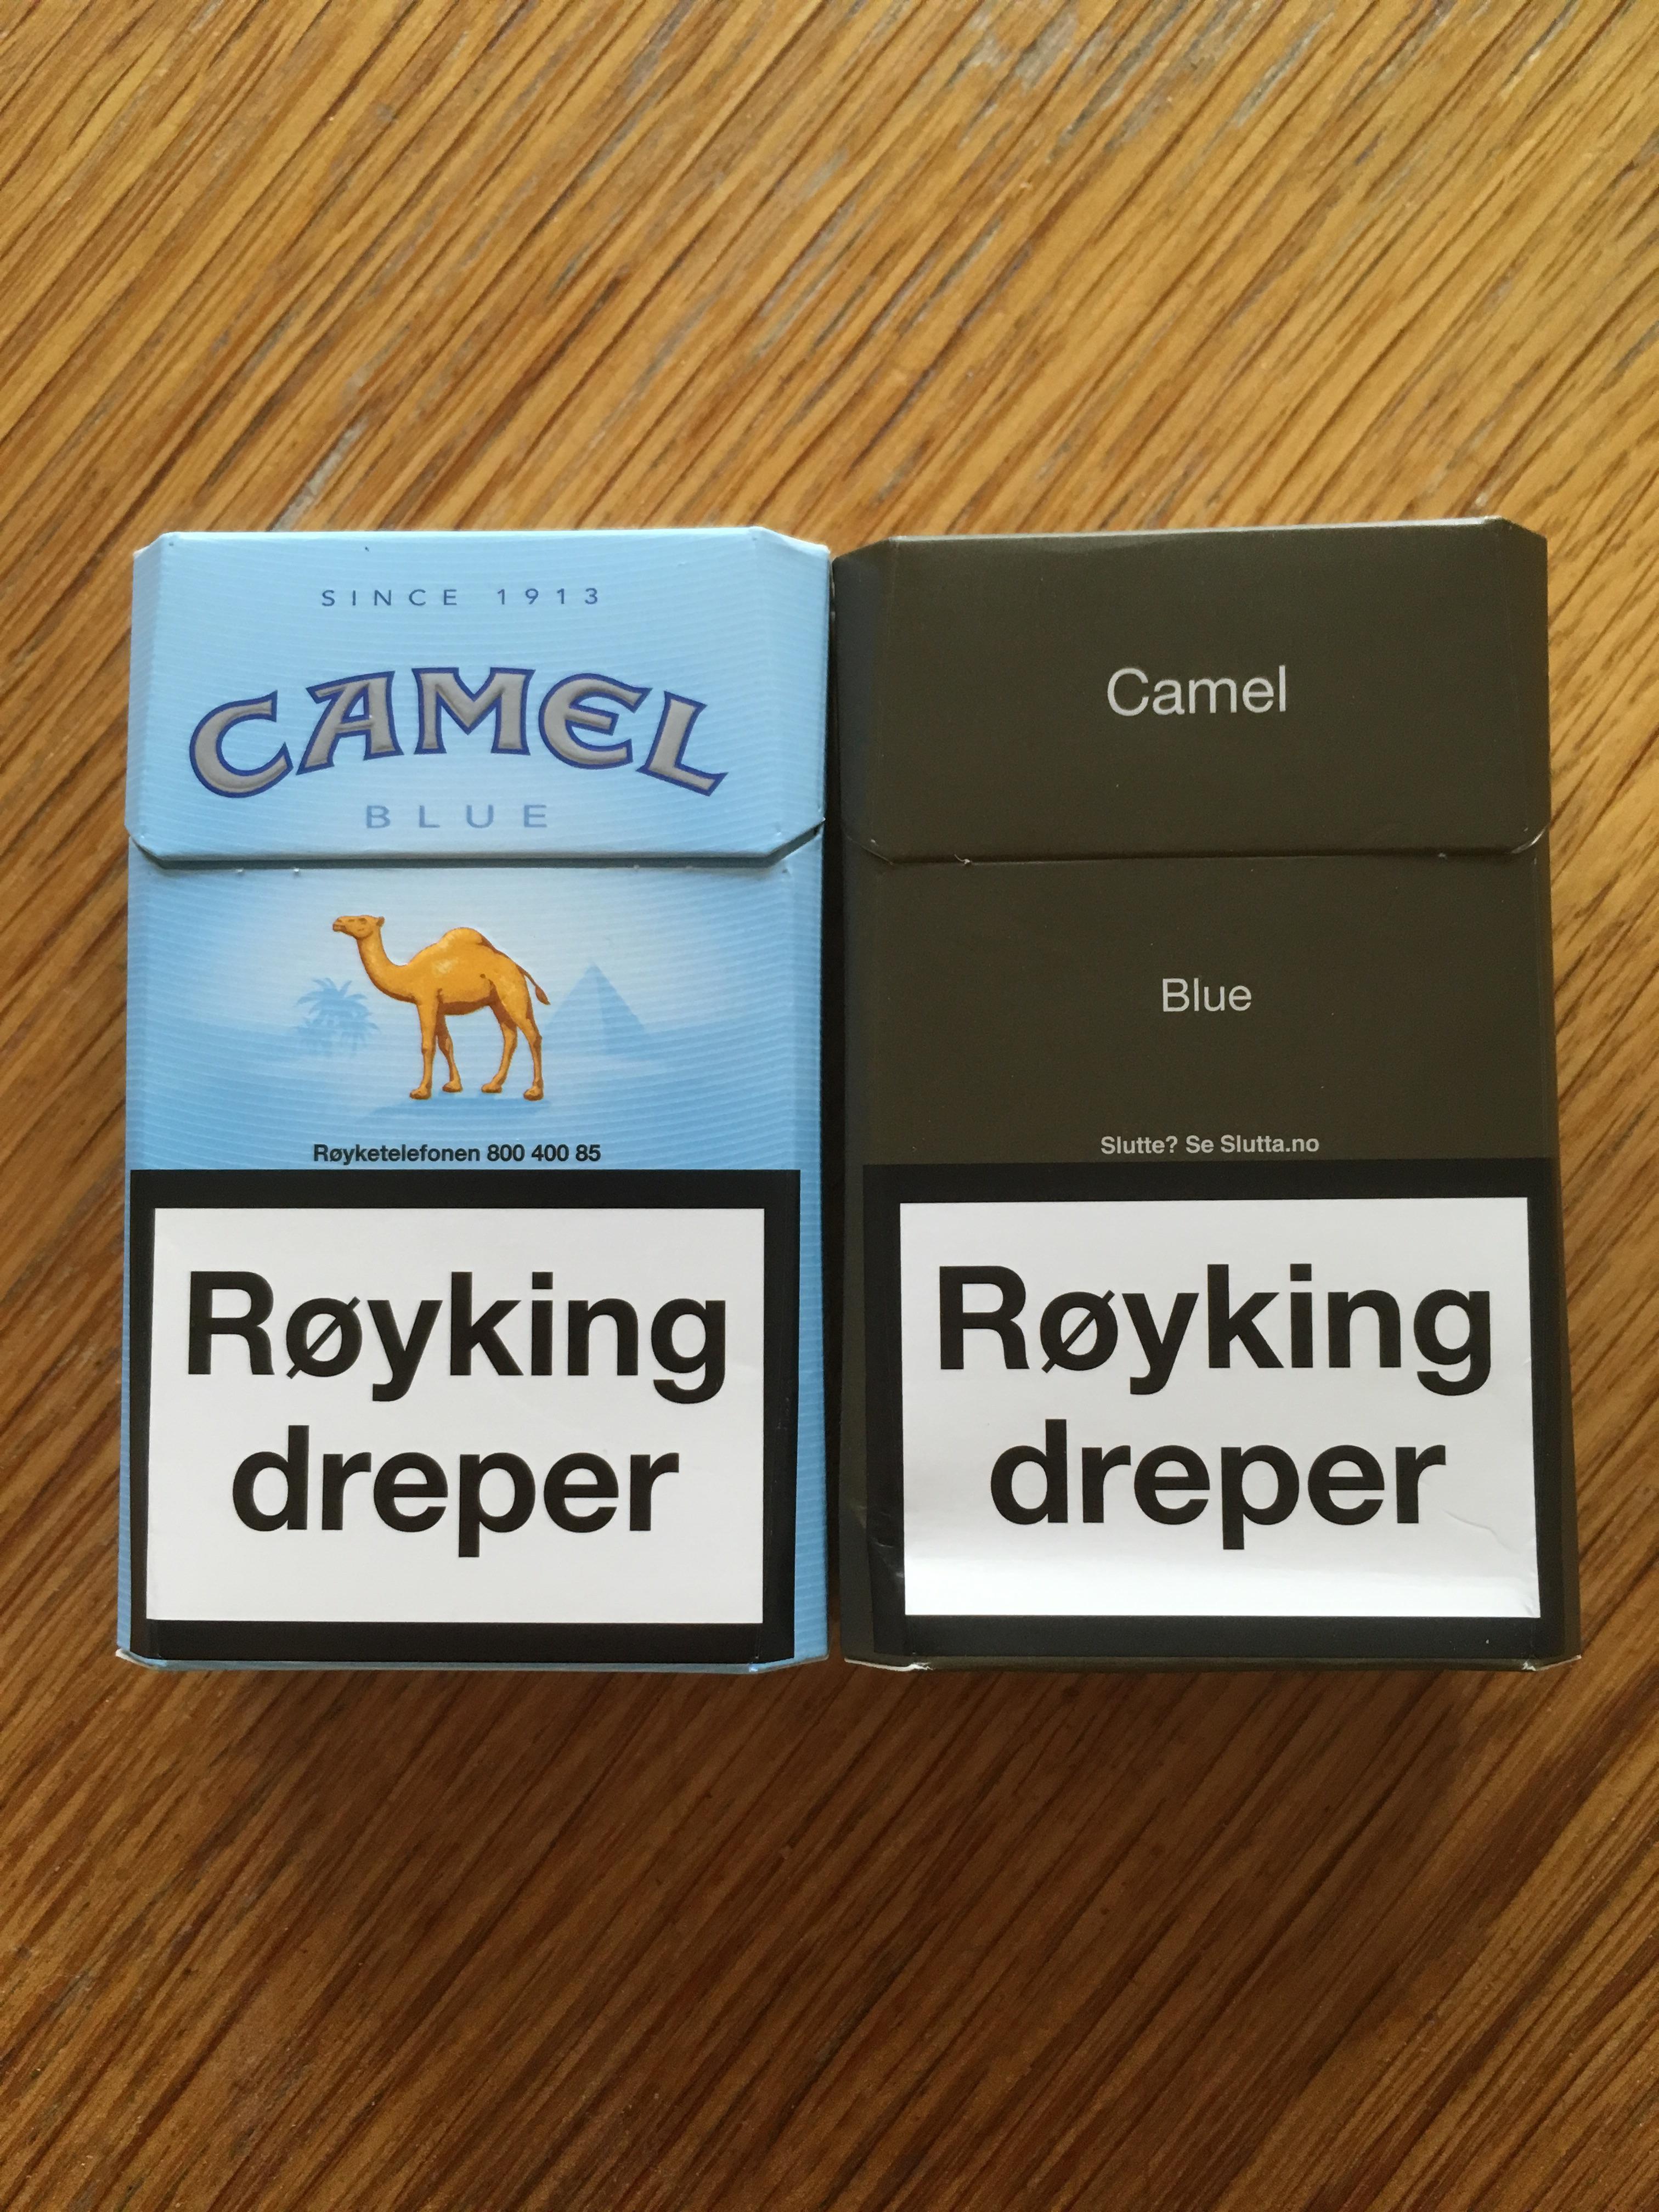 All tobacco products sold in Norway must come in the same colored package with no other graphics or logos, to make smoking less appealing to the youth.